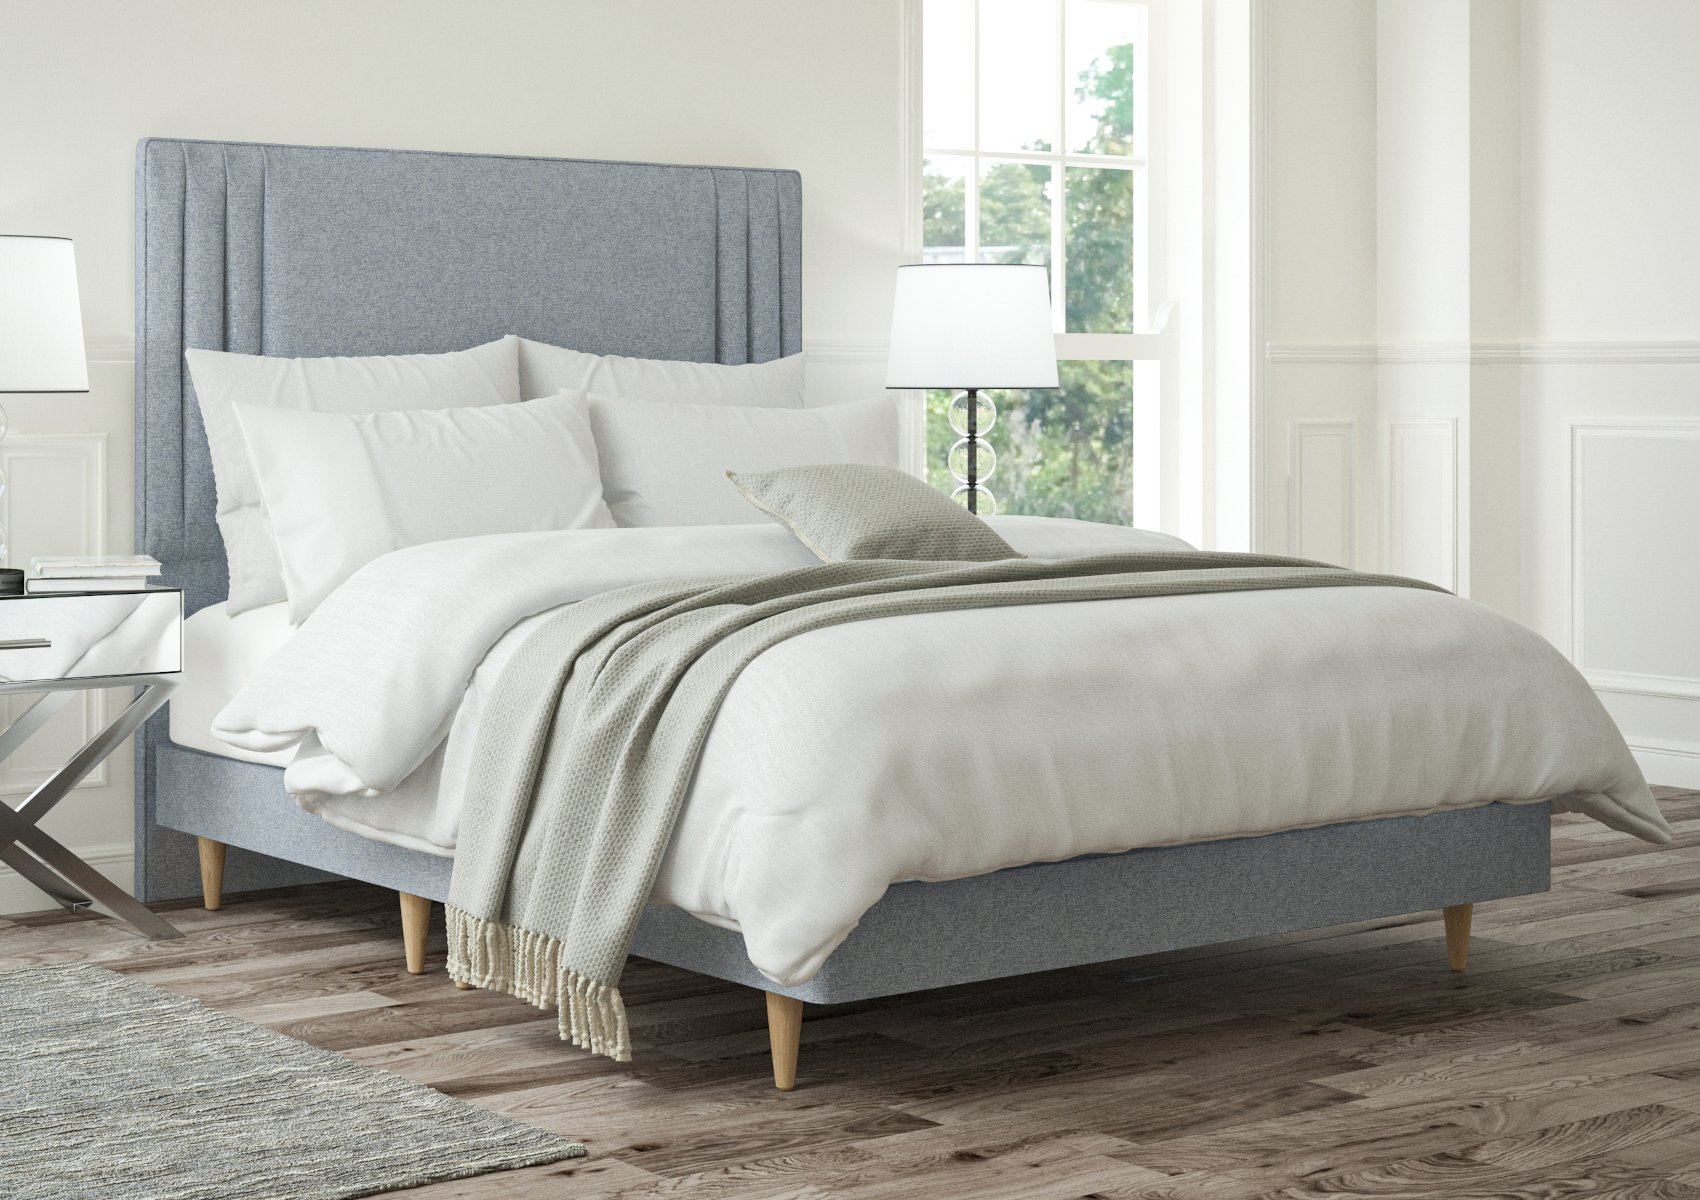 View Faith Arran Cyan Upholstered King Size Bed Time4Sleep information